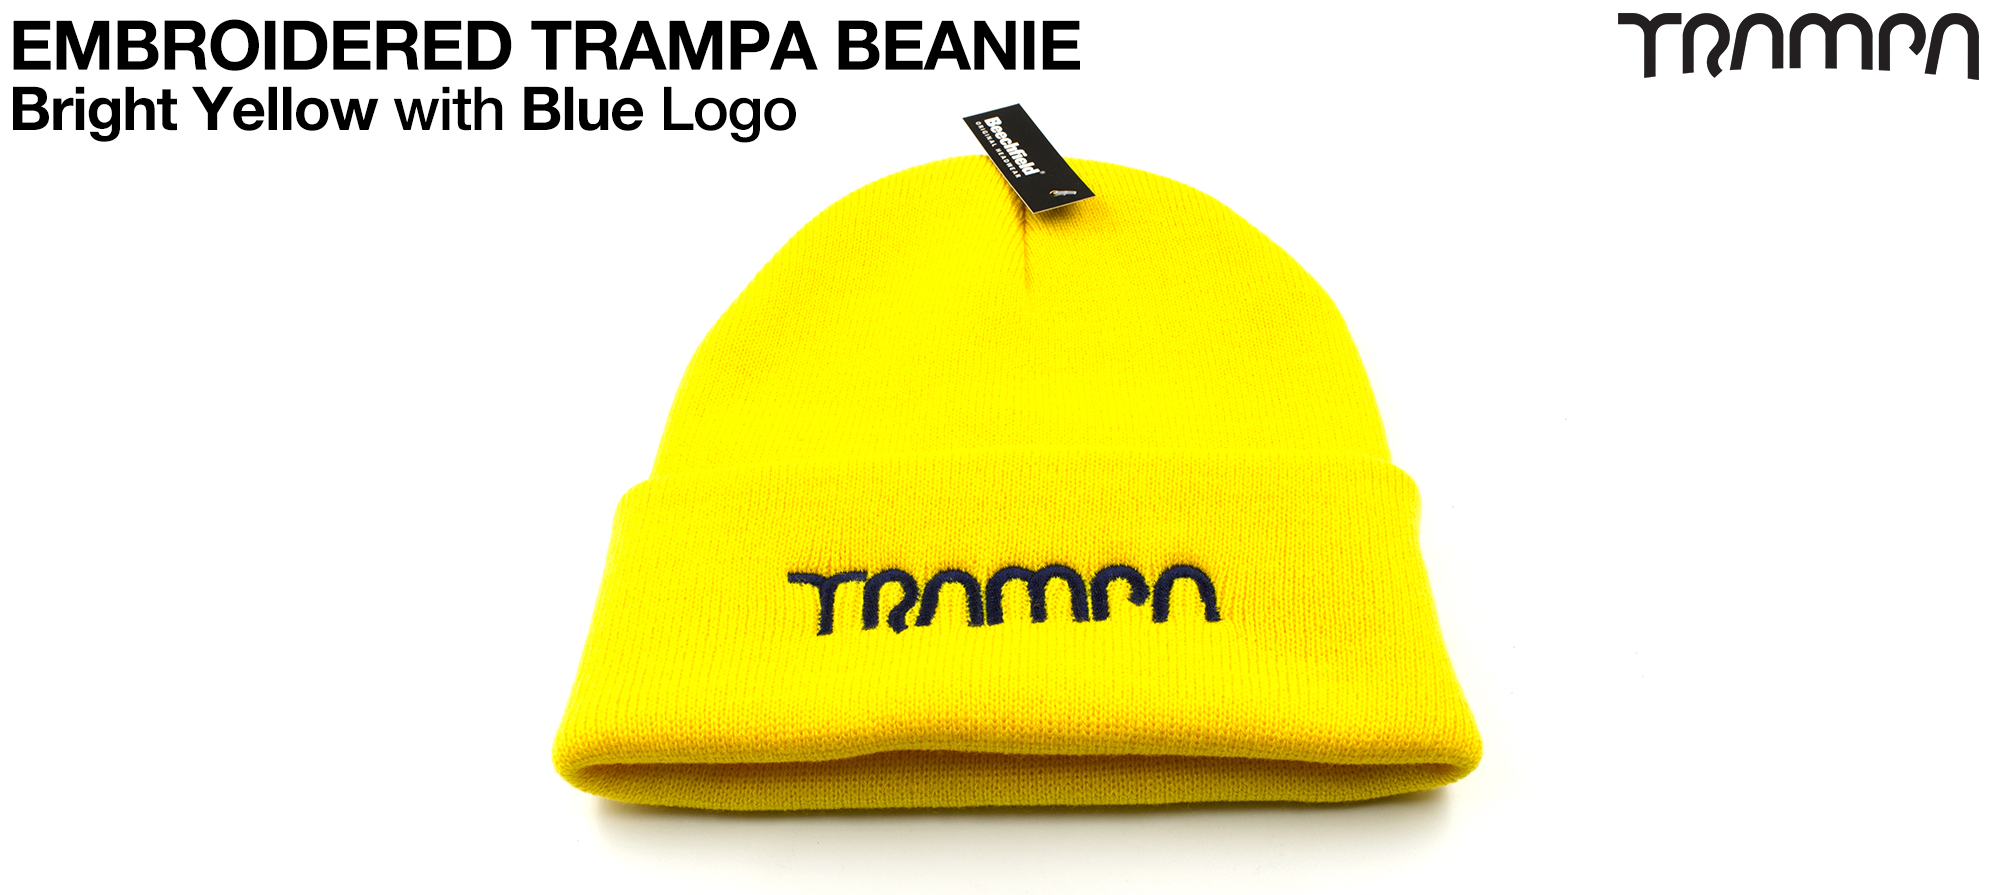 Bright YELLOW Beanie with NAVY BLUE Embroidered TRAMPA logo - Double thick turn over for extra warmth